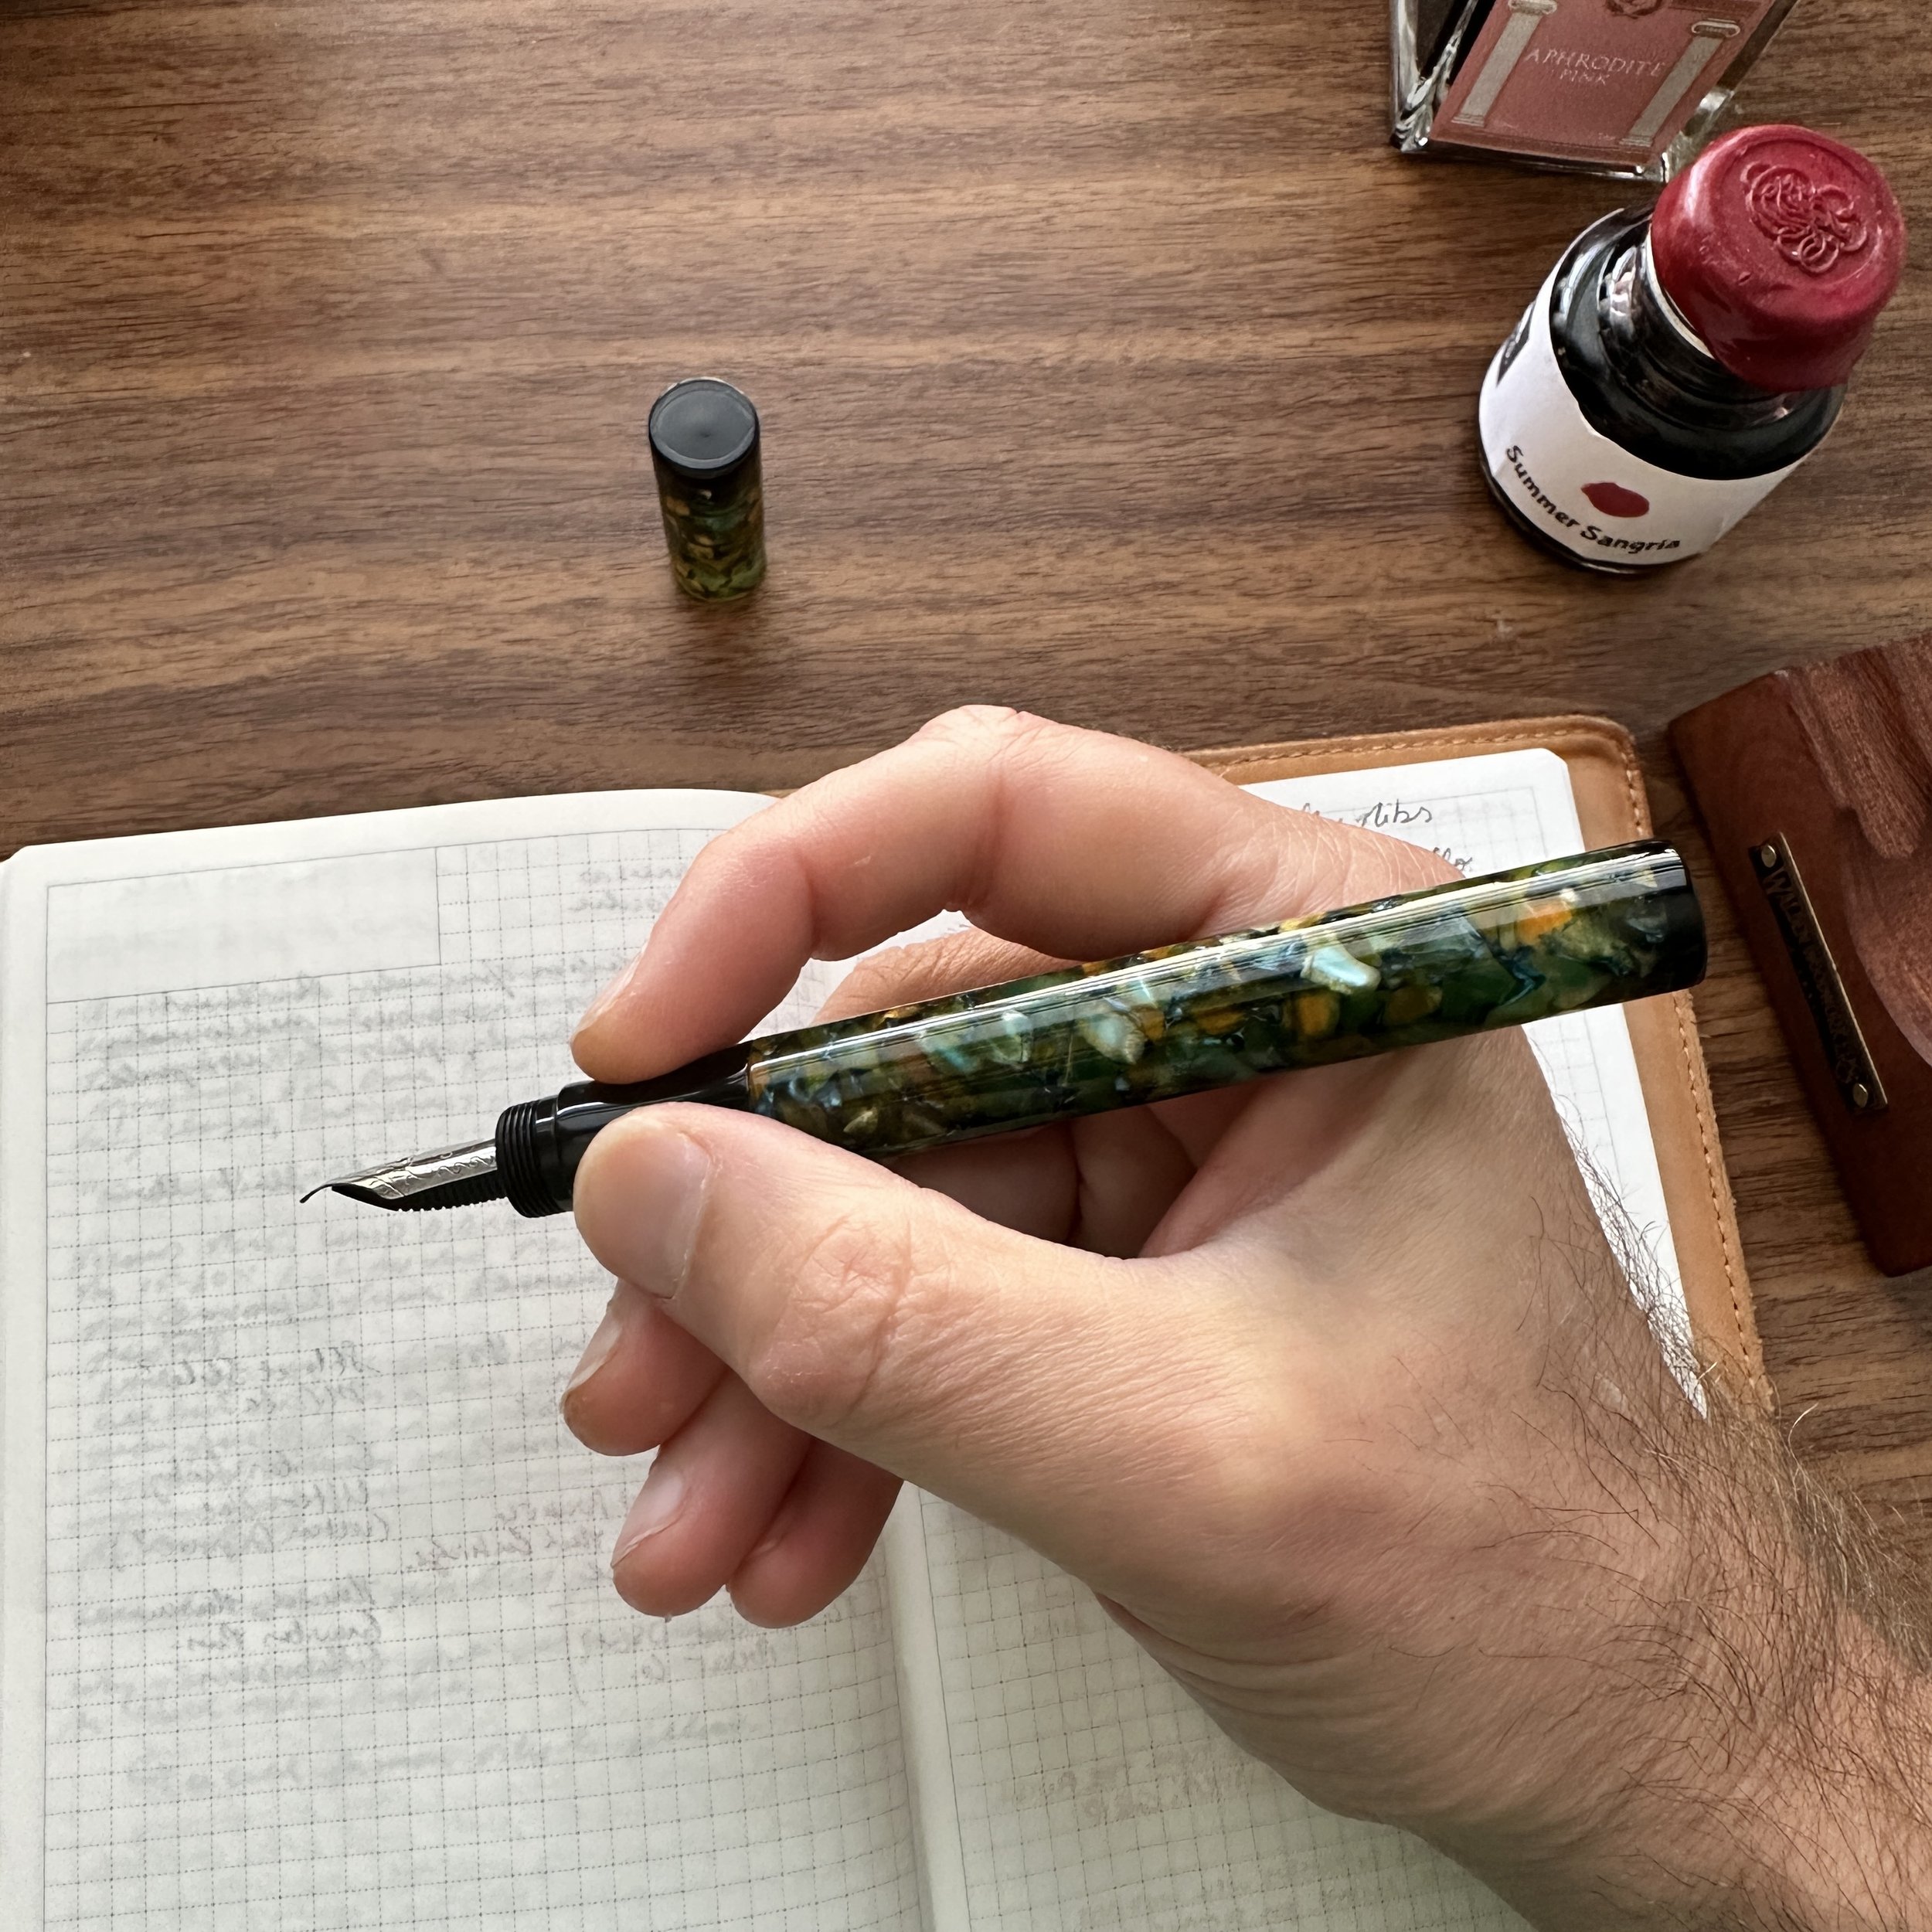 A Comprehensive Review of Writing Instruments (Pens) by Parisian Gentleman